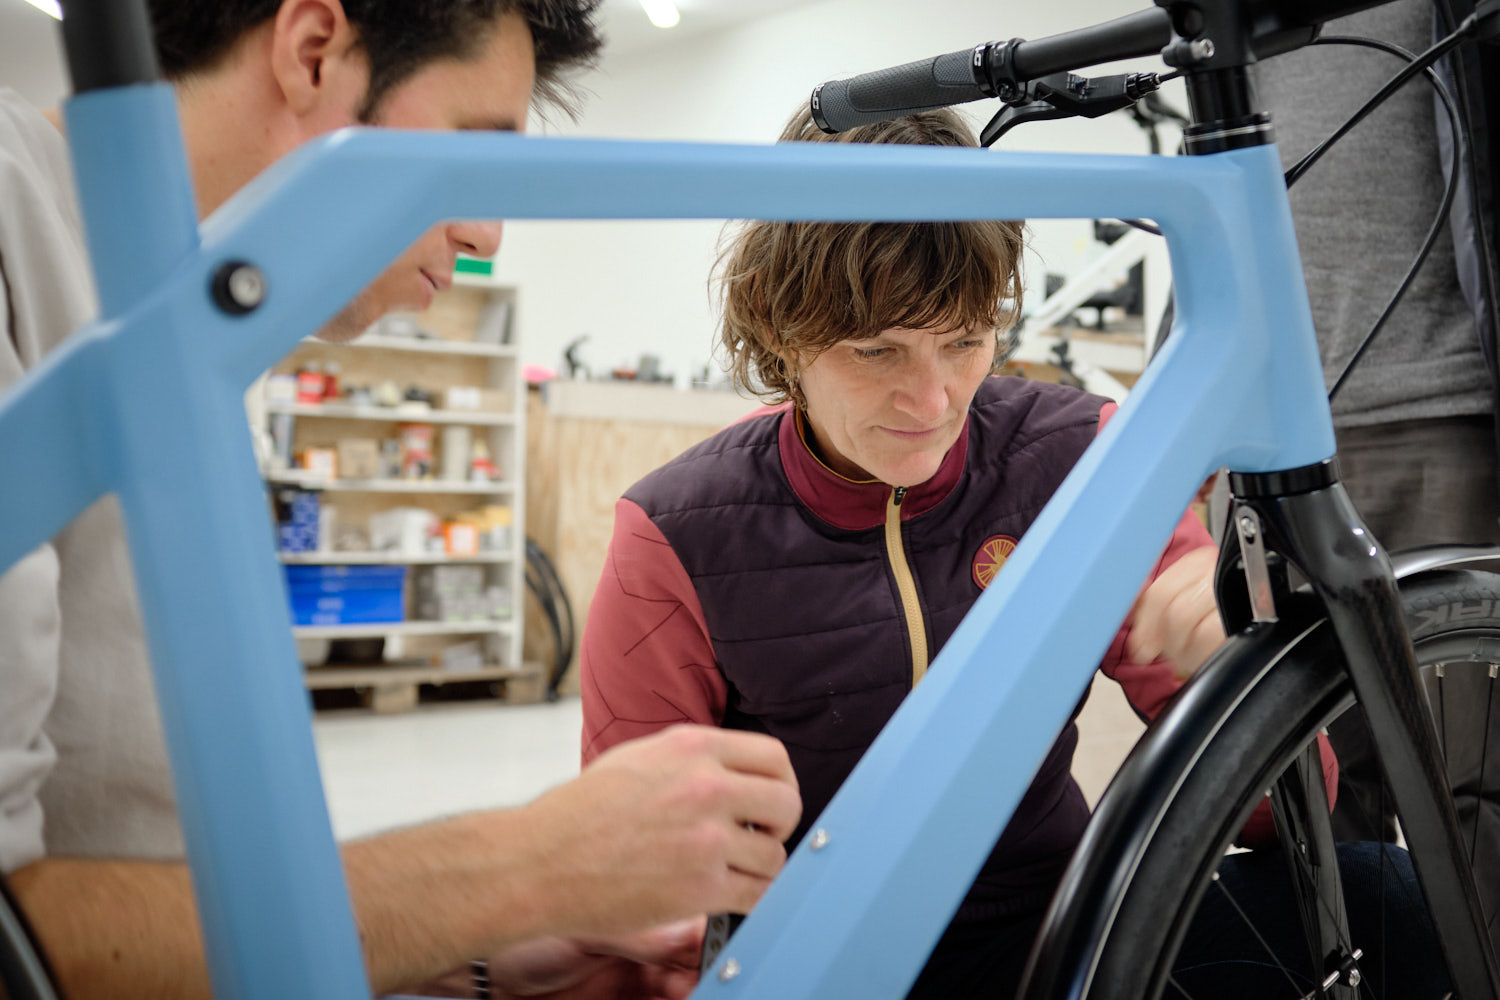 Mette Walsted doing quality control on a Erik urban bicycle in the bikefarm in Kelstrup, Slagelse for Danish bicycle company